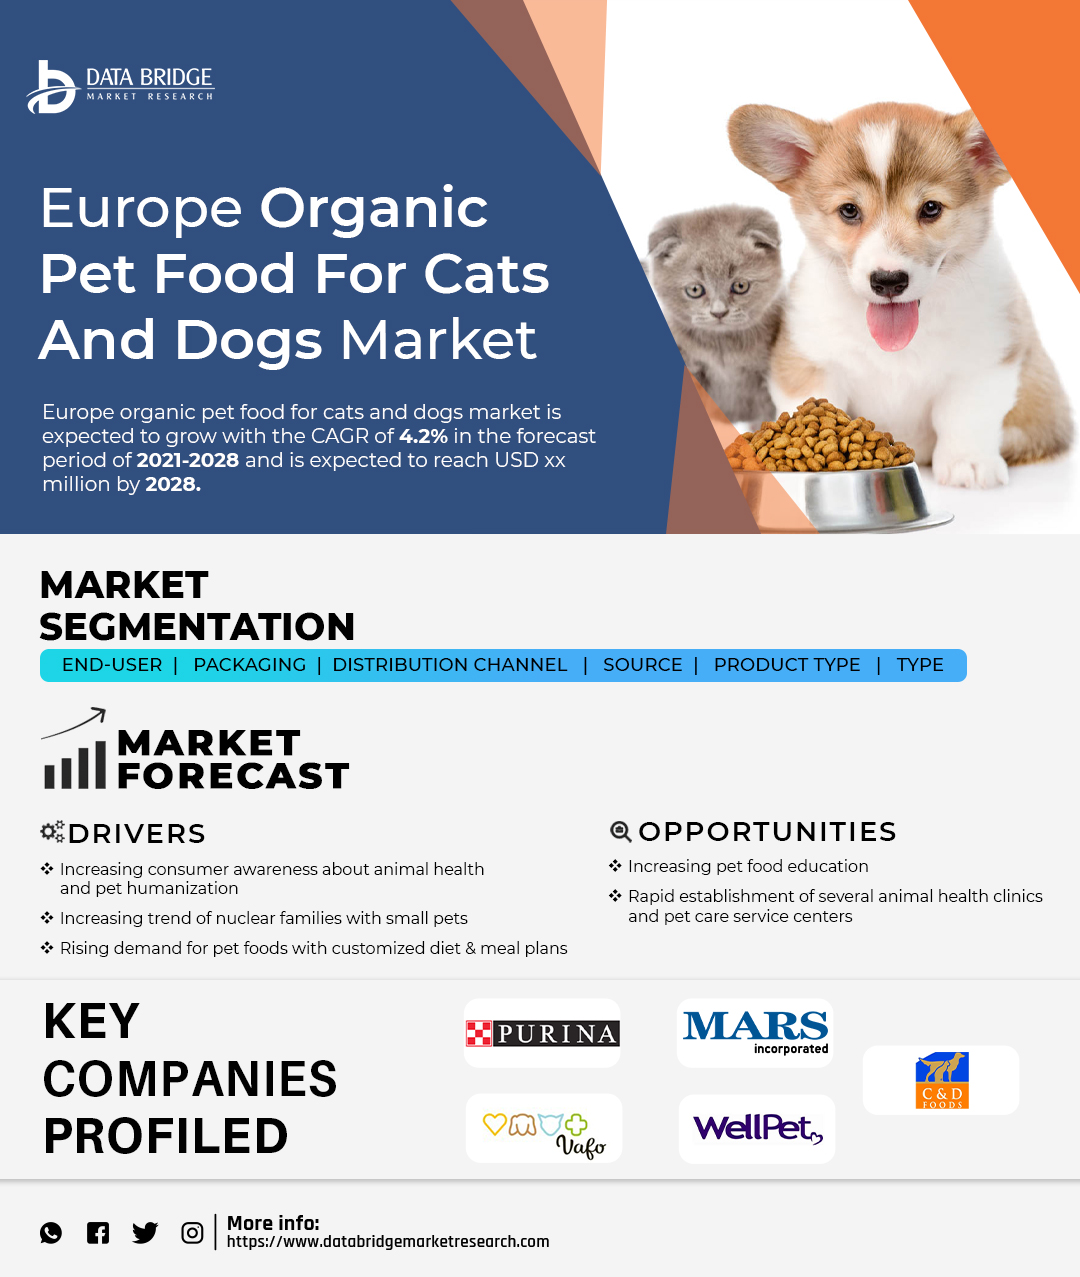 Europe Organic Pet Food for Cats and Dogs Market